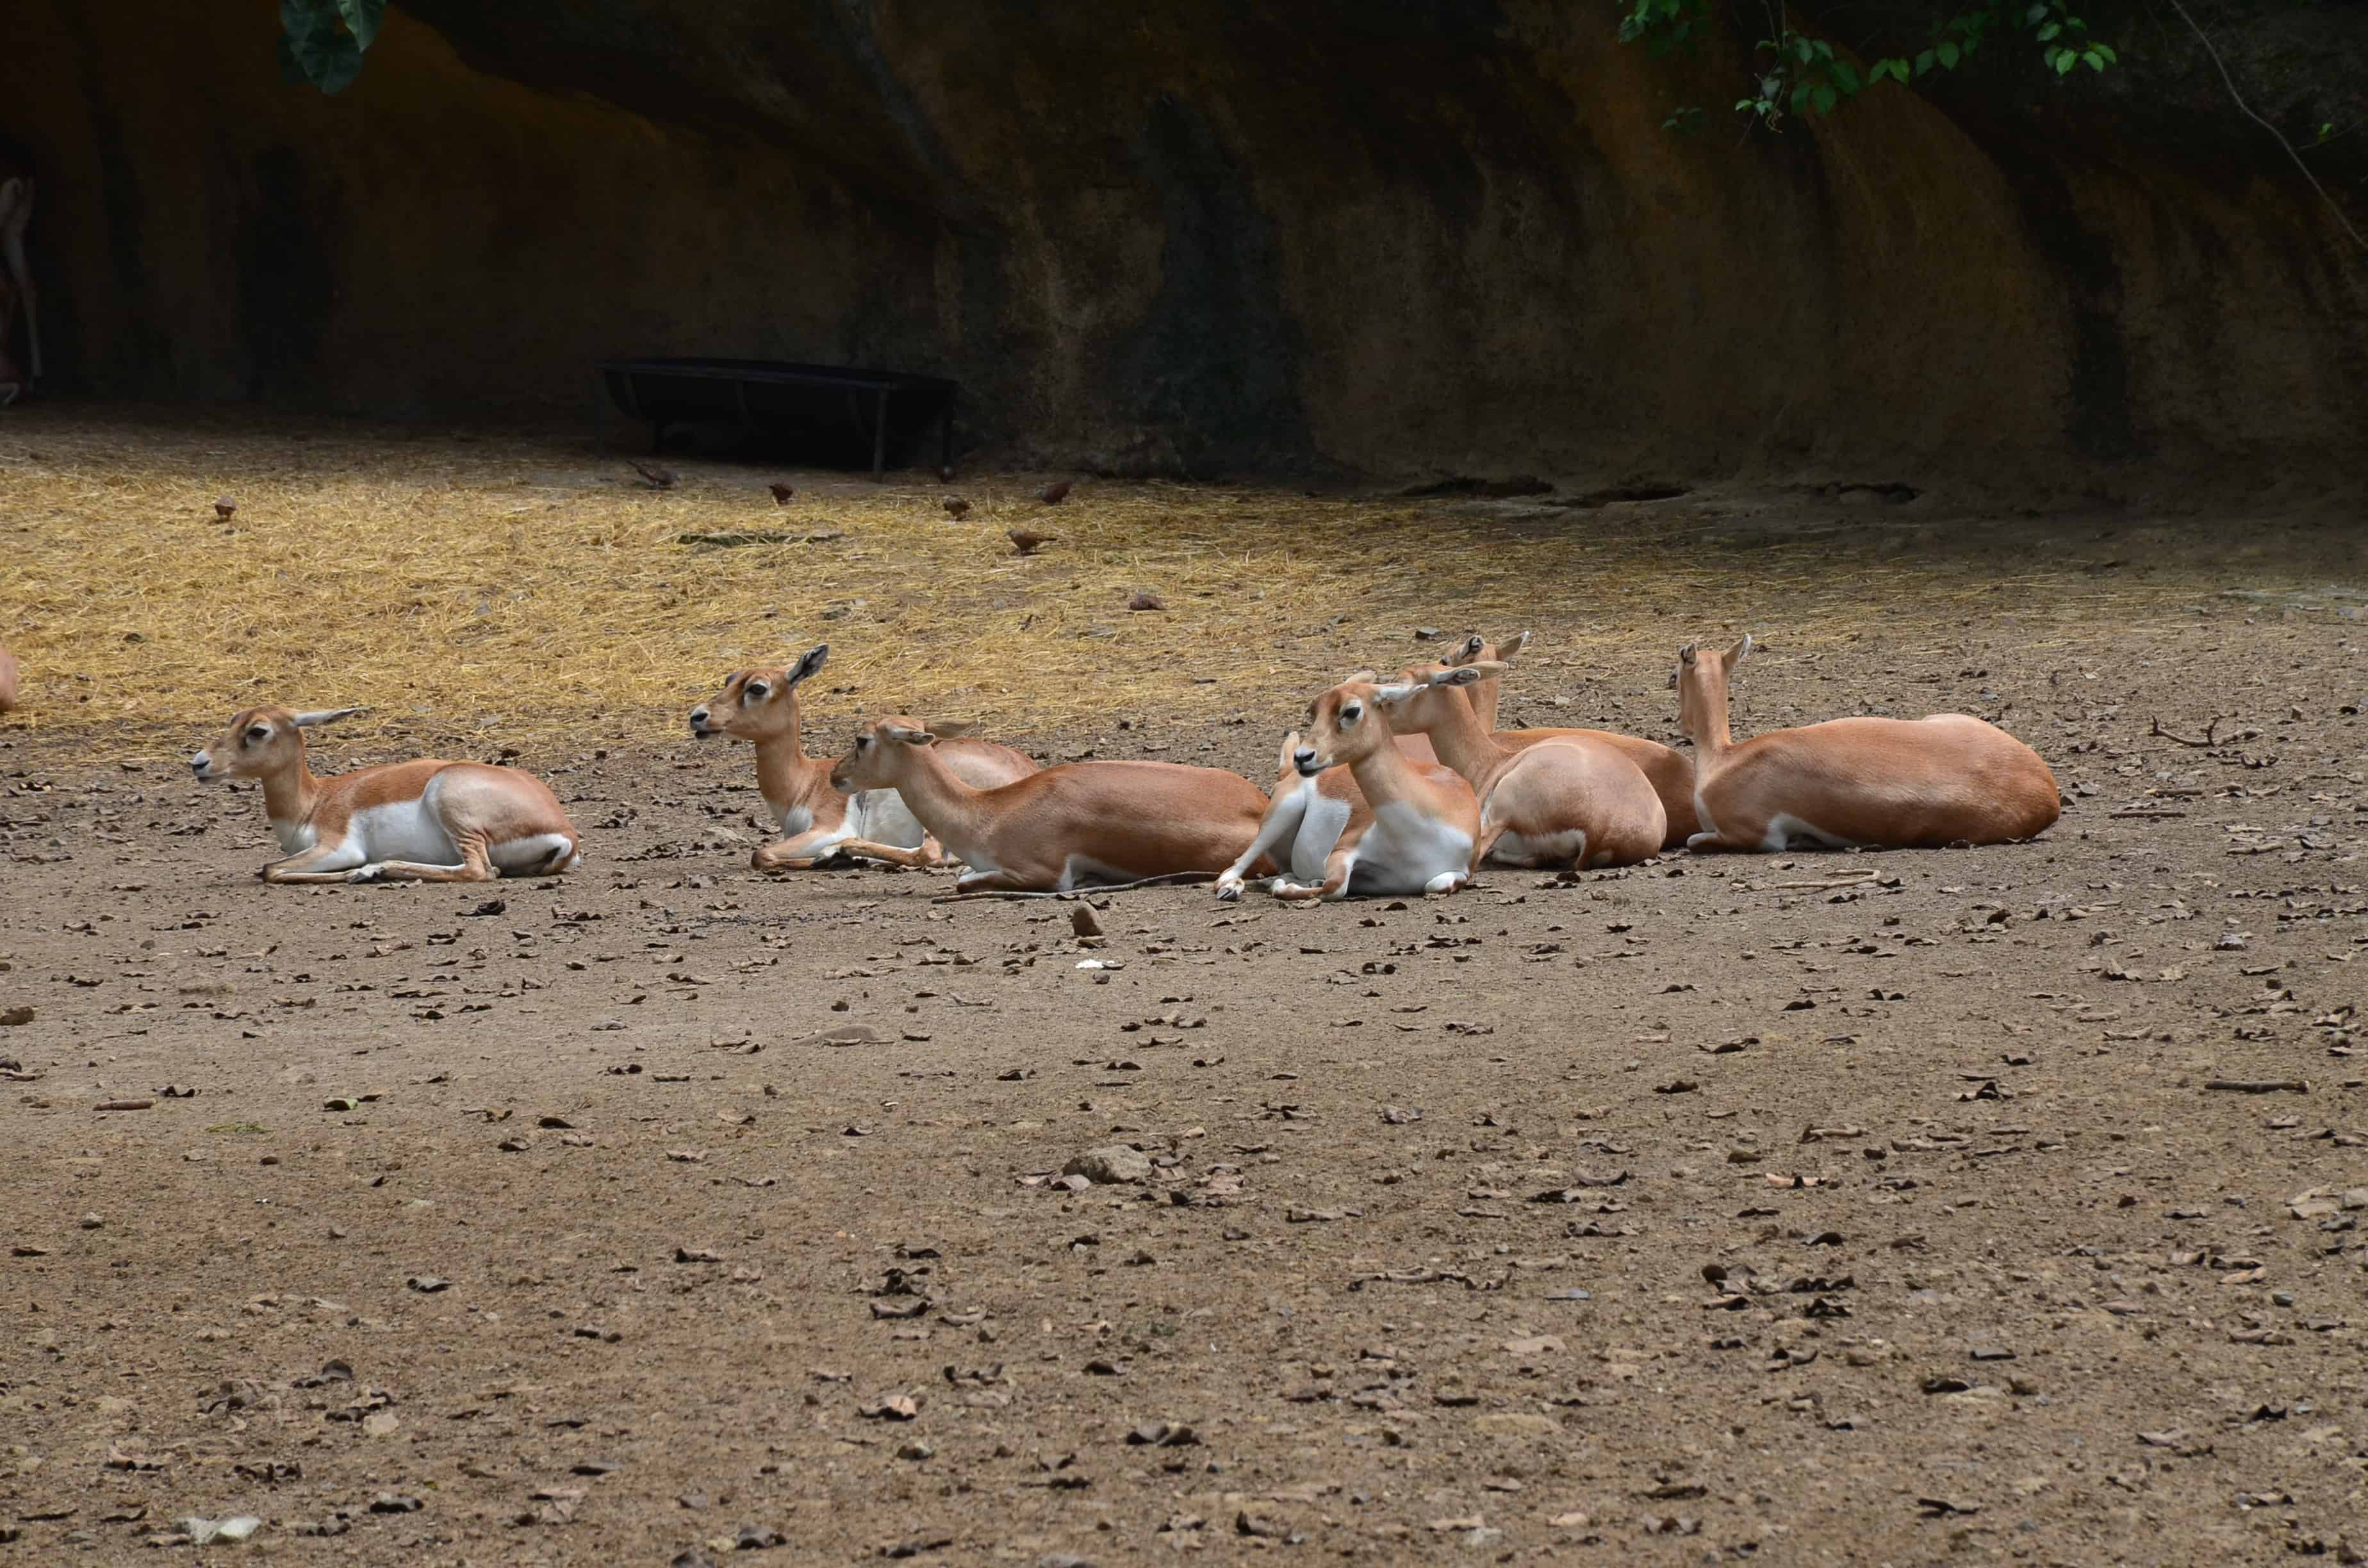 Antelope at the Cali Zoo in Colombia